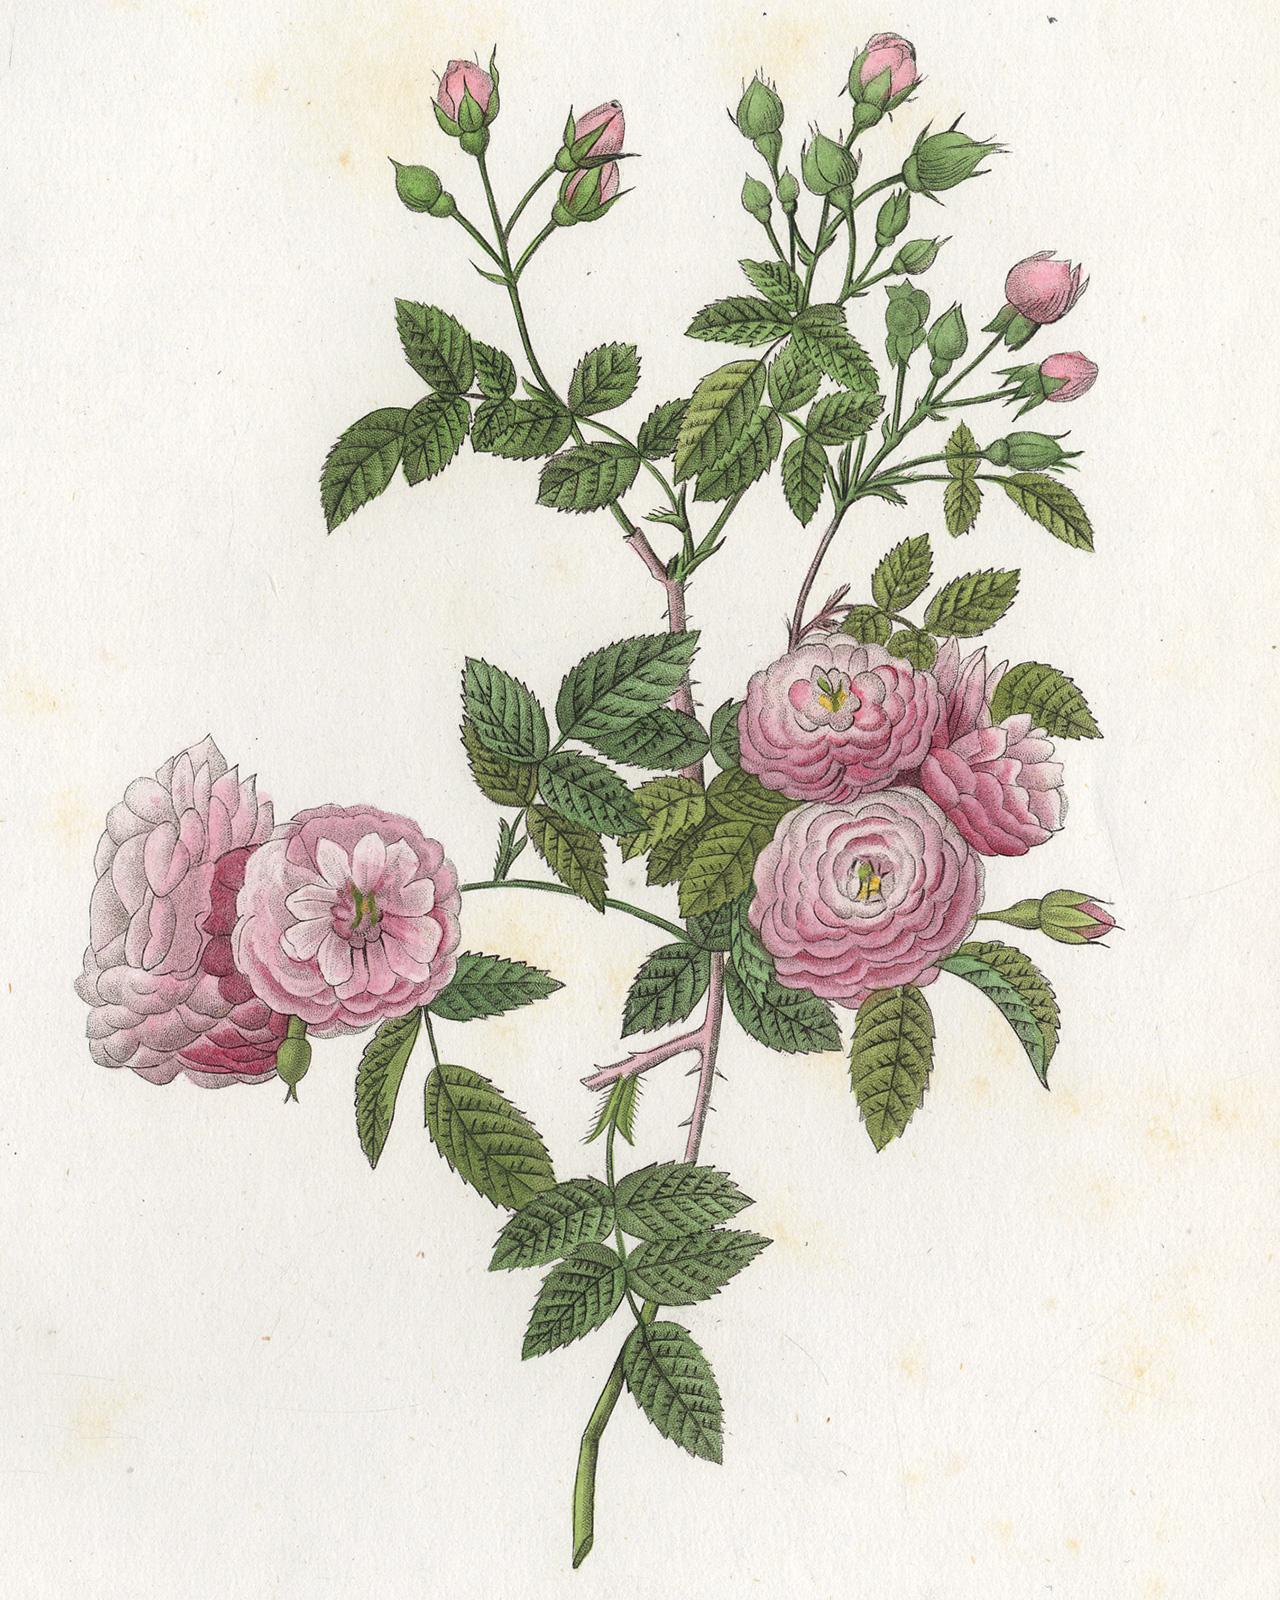 Rambling Rose by Redoute - Les Roses - Handcoloured engraving - 19th century - Print by Pierre-Joseph Redouté